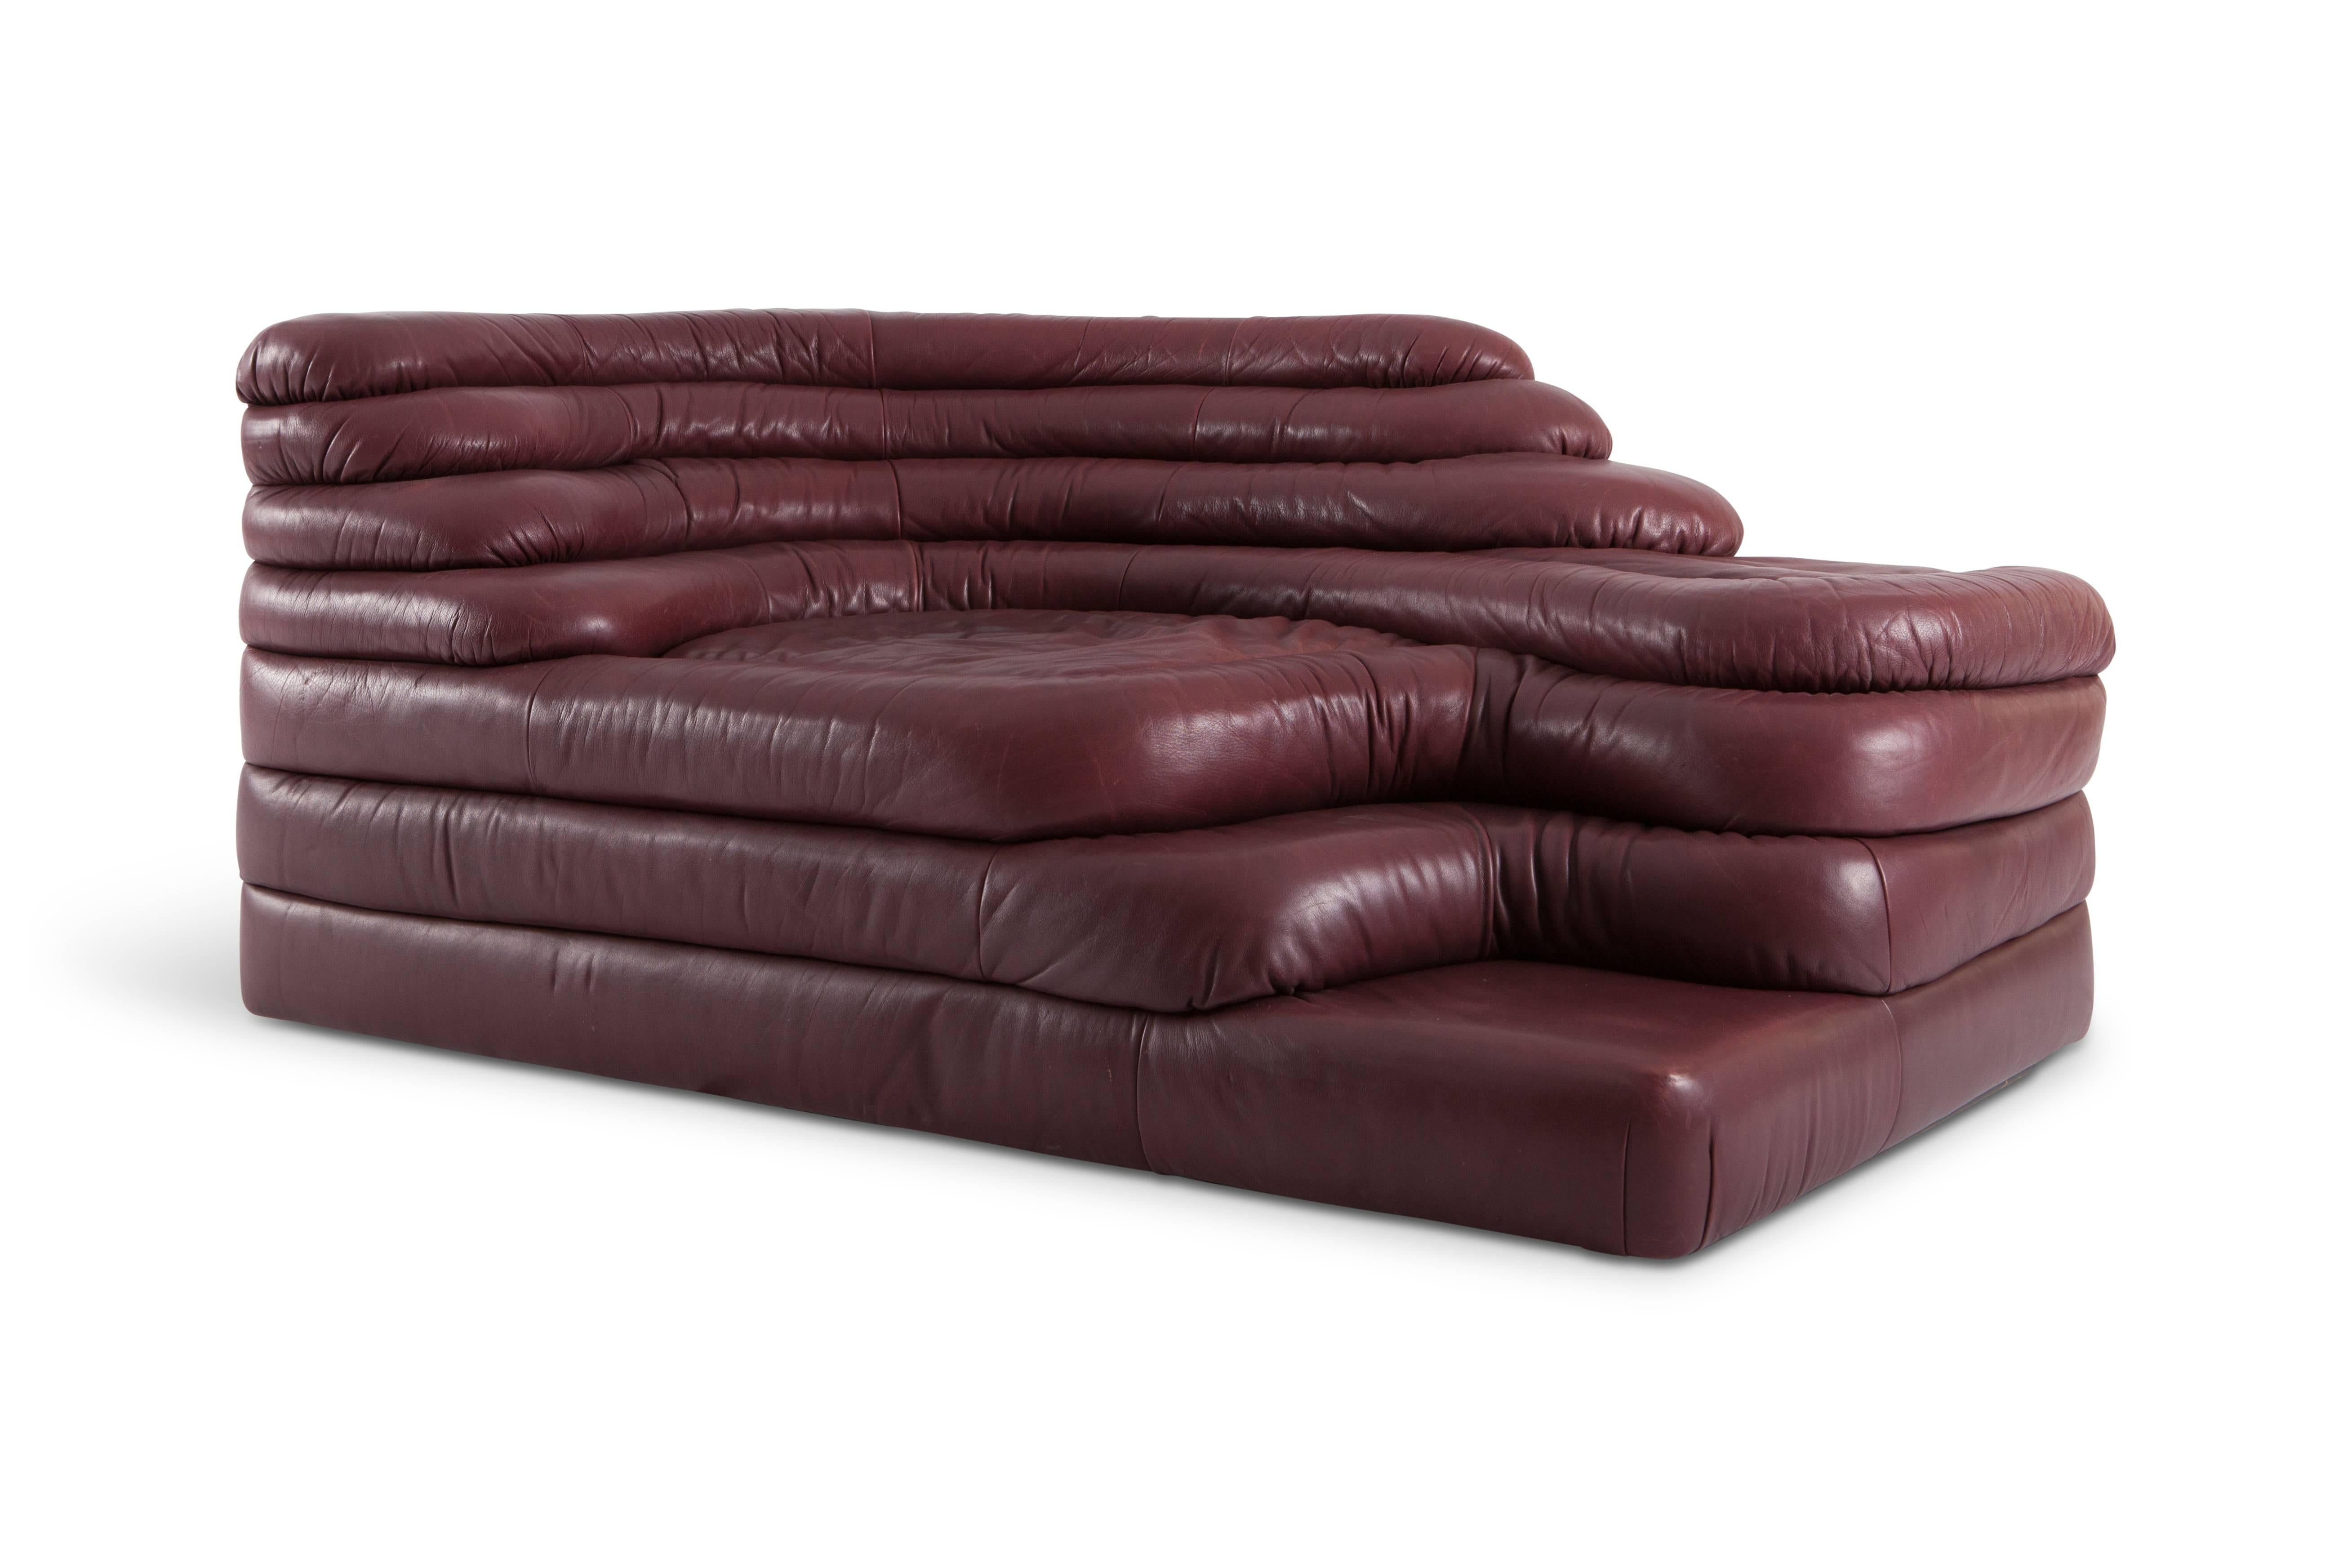 Set of two DS1025 ‘’Terrazza” Landscape sofa elements in original high quality burgundy leather,
by Ubald Klug for De Sede, Switzerland, 1970s. 

De Sede is well know for making high end quality sofas with many iconic designs on their